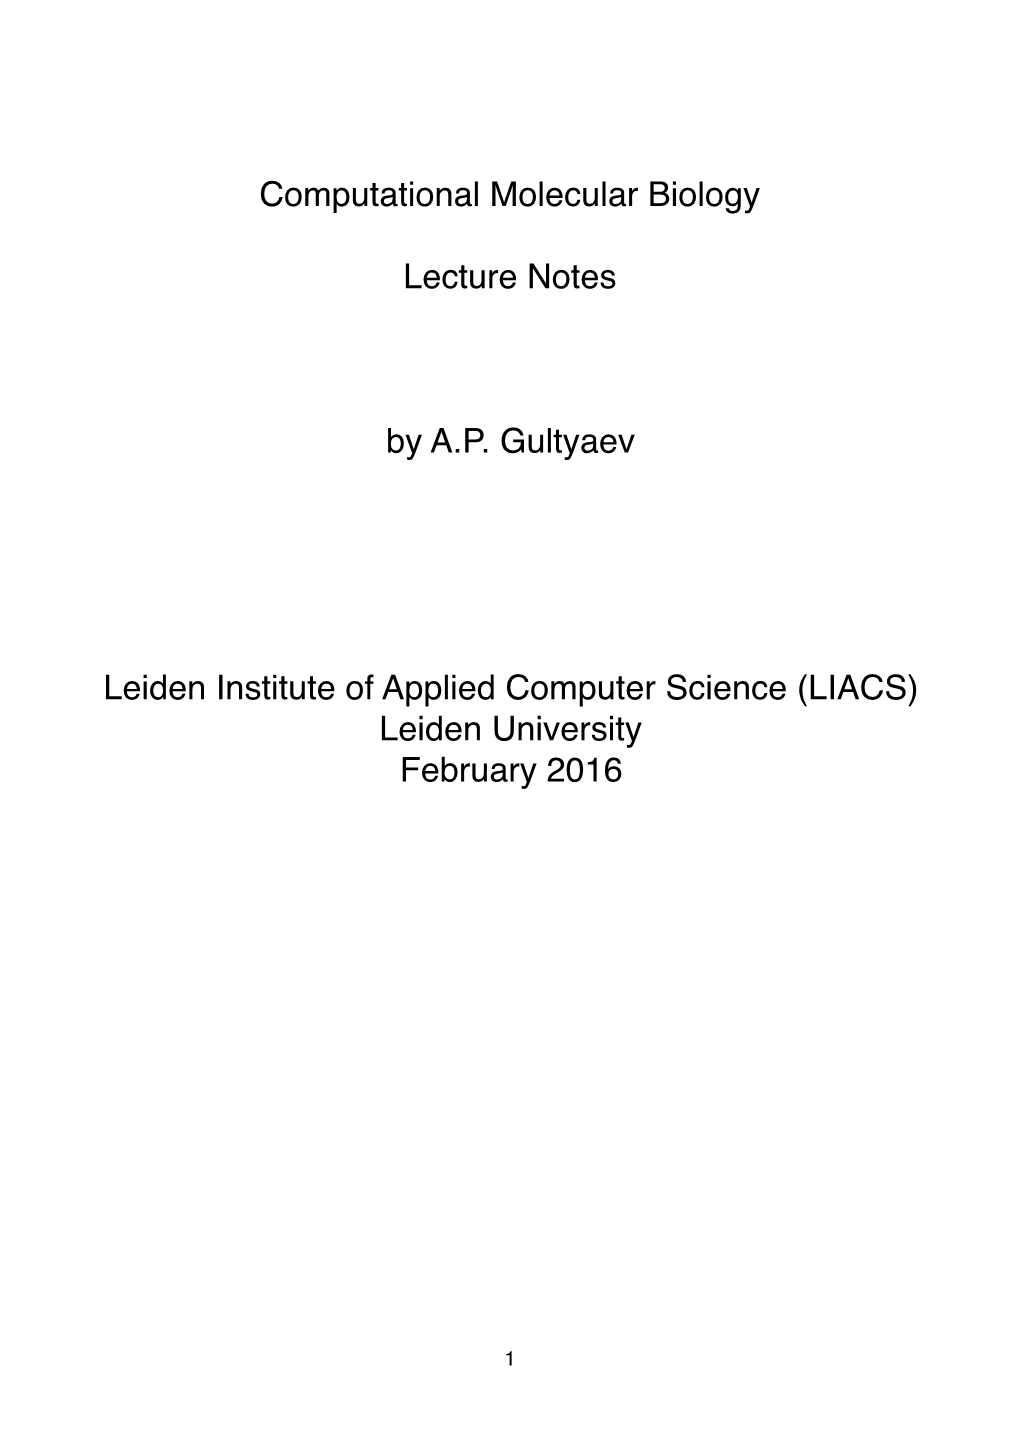 Computational Molecular Biology Lecture Notes by A.P. Gultyaev